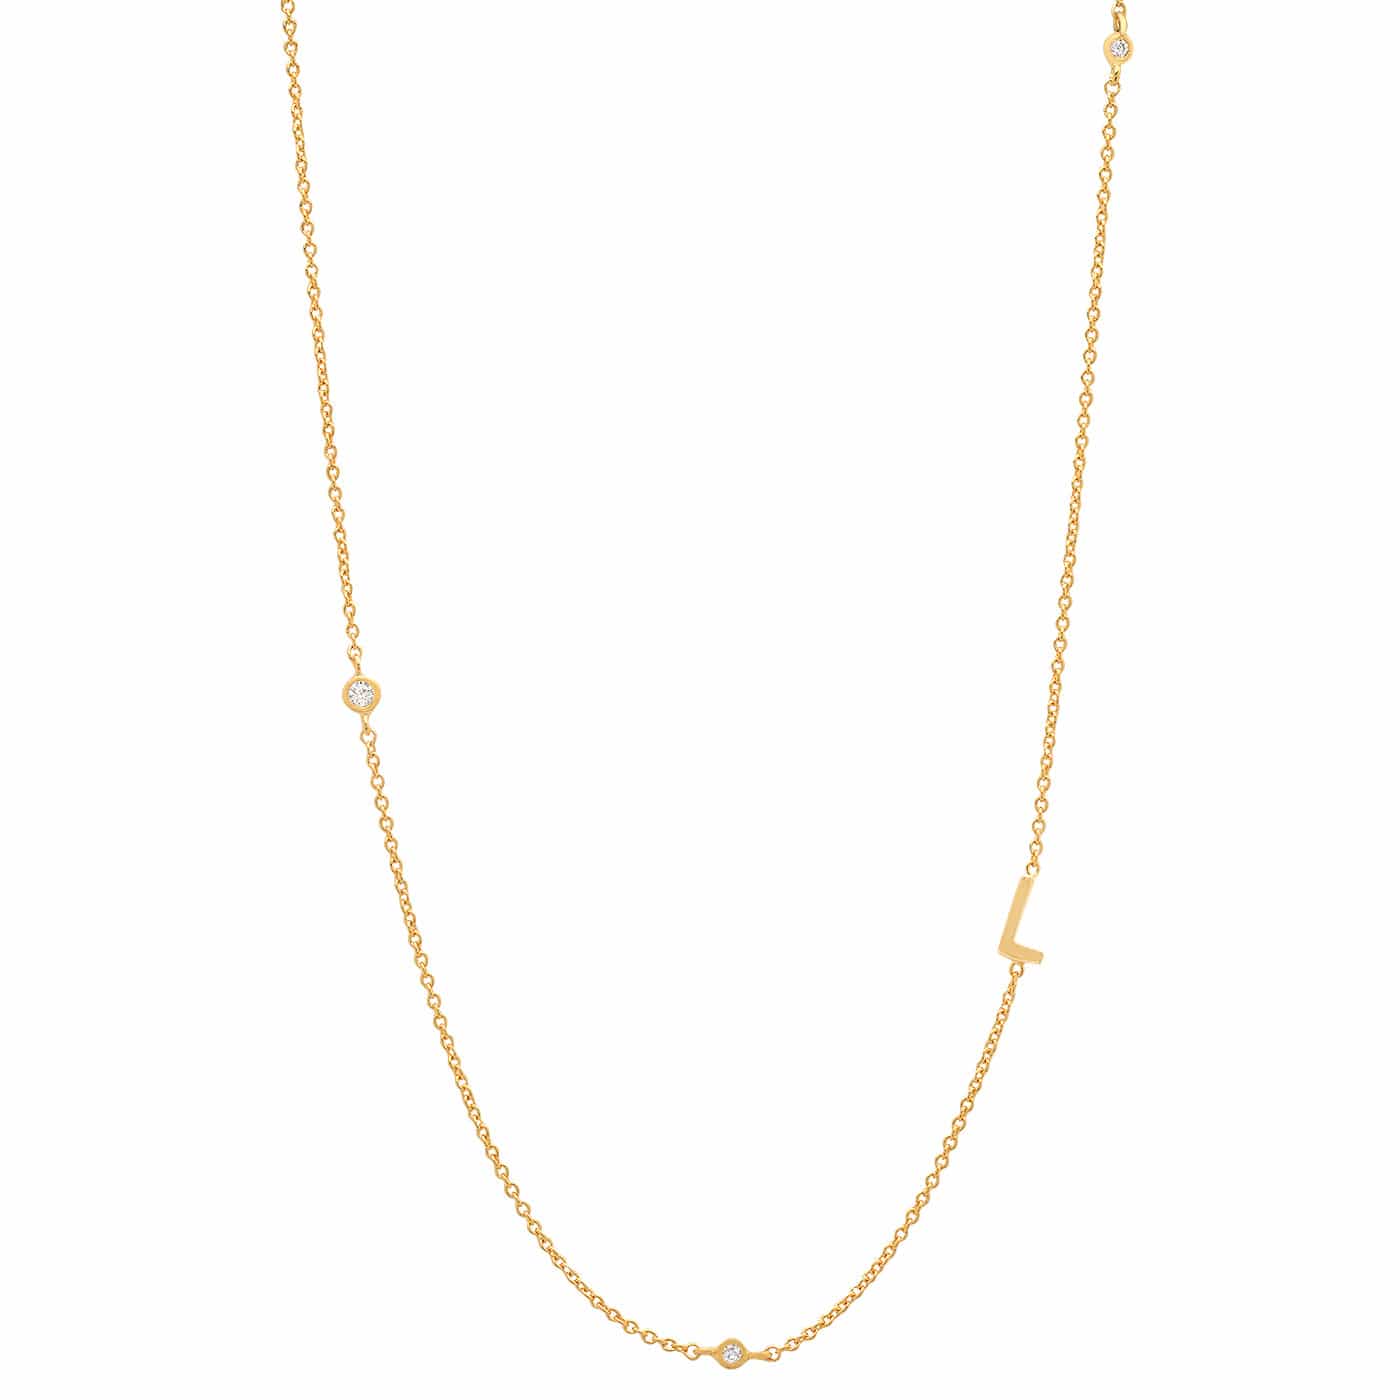 TAI JEWELRY Necklace L Sideways Initial Gold Necklace With CZ Accents